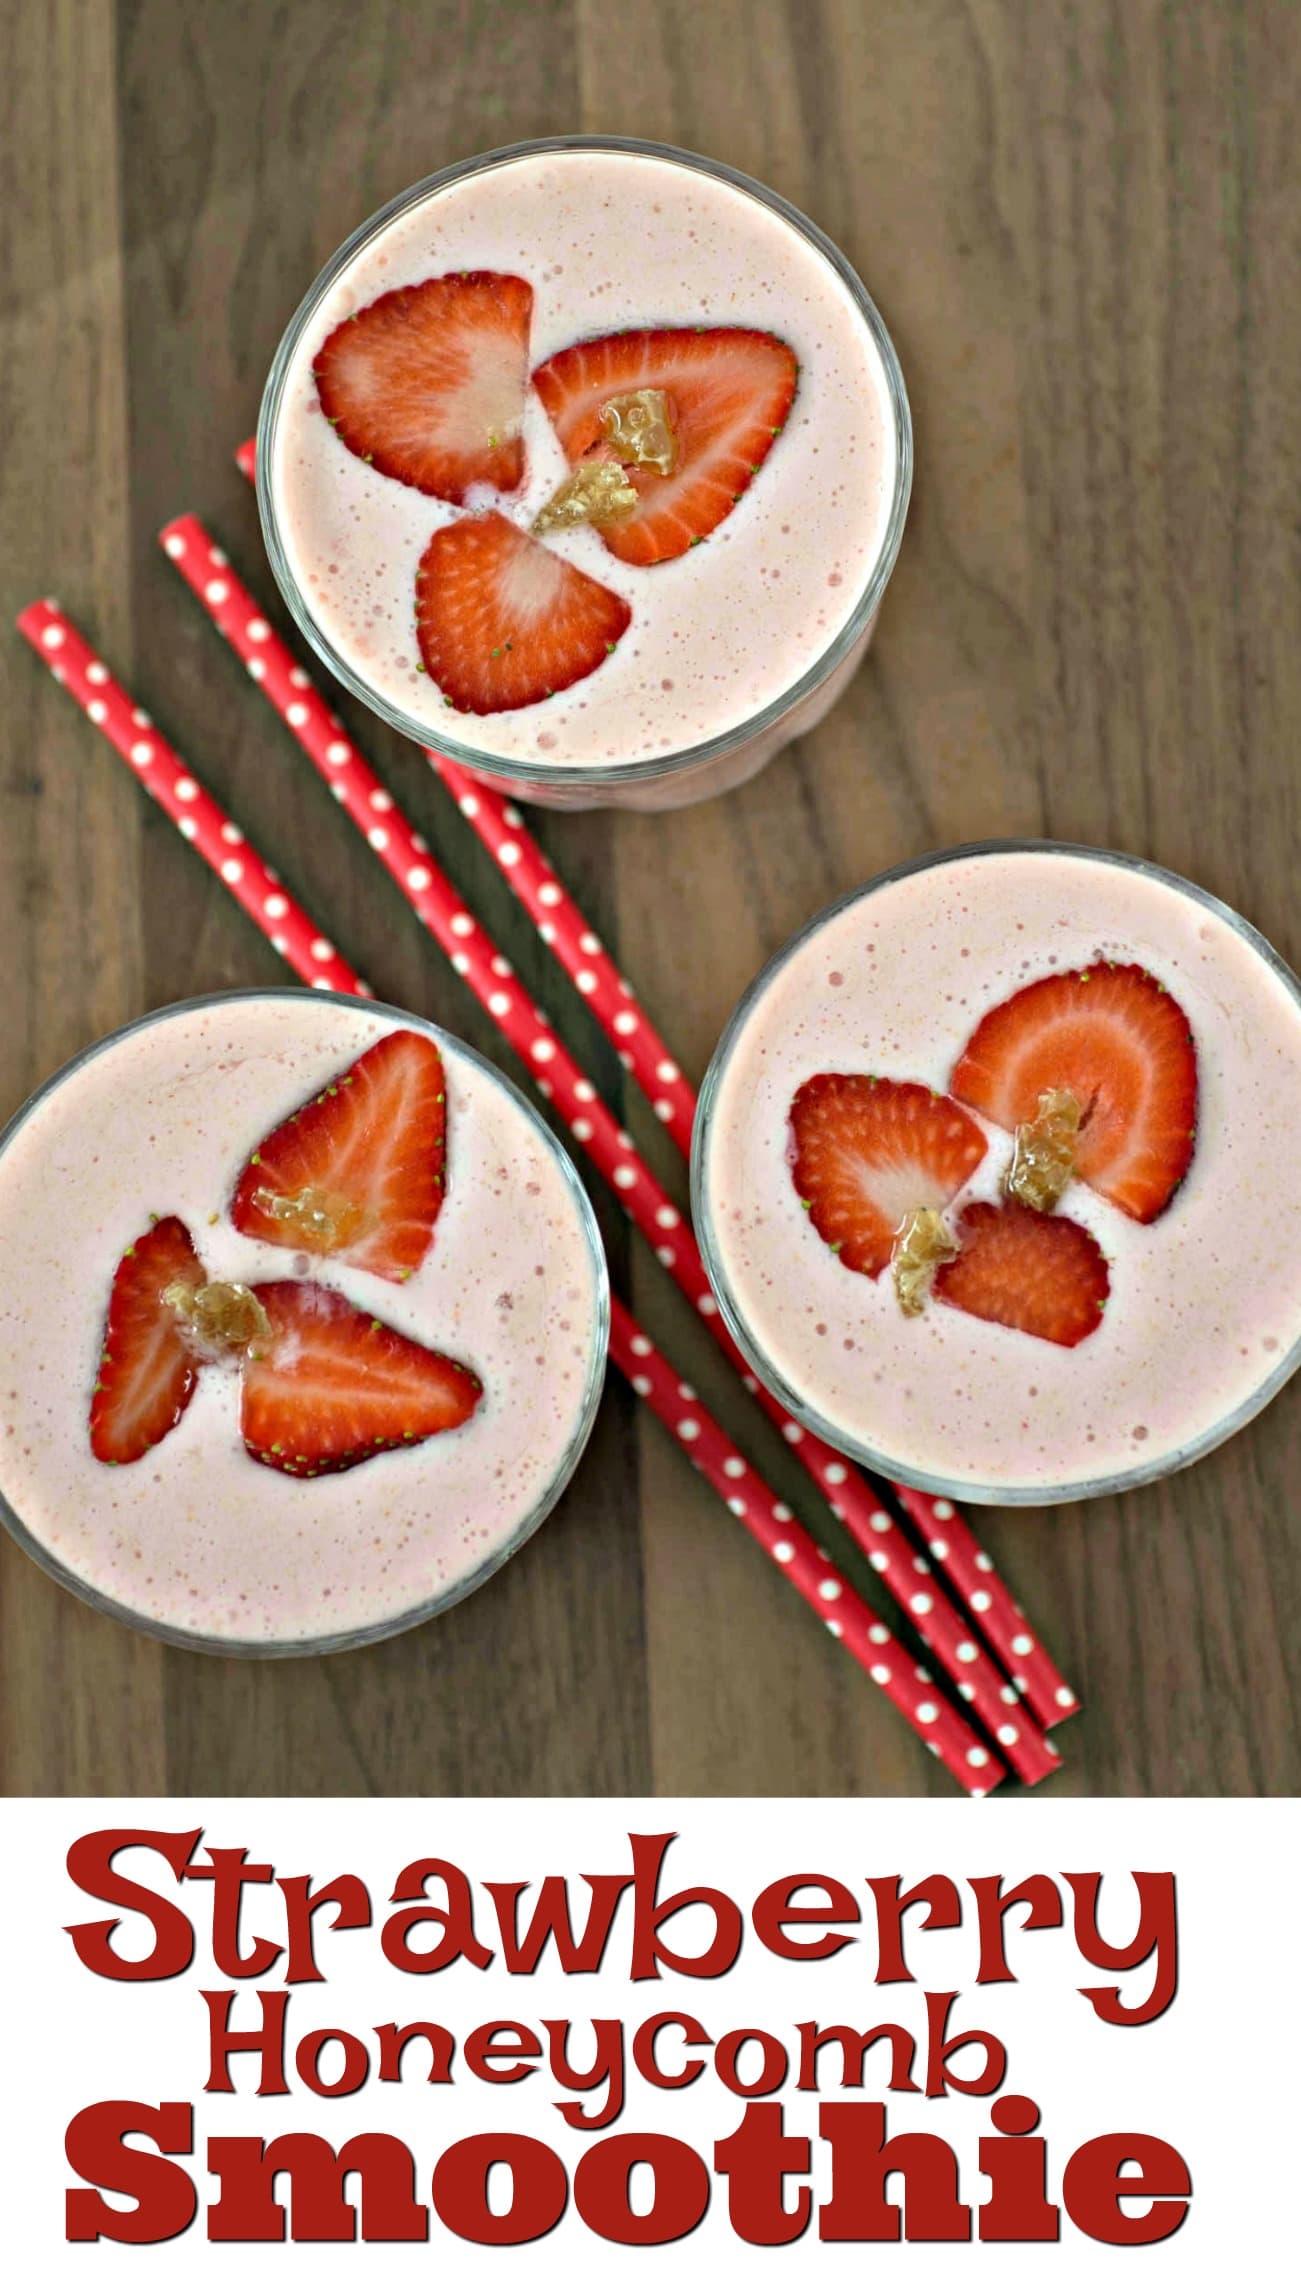 Strawberry honeycomb smoothie with strawberries and straws.